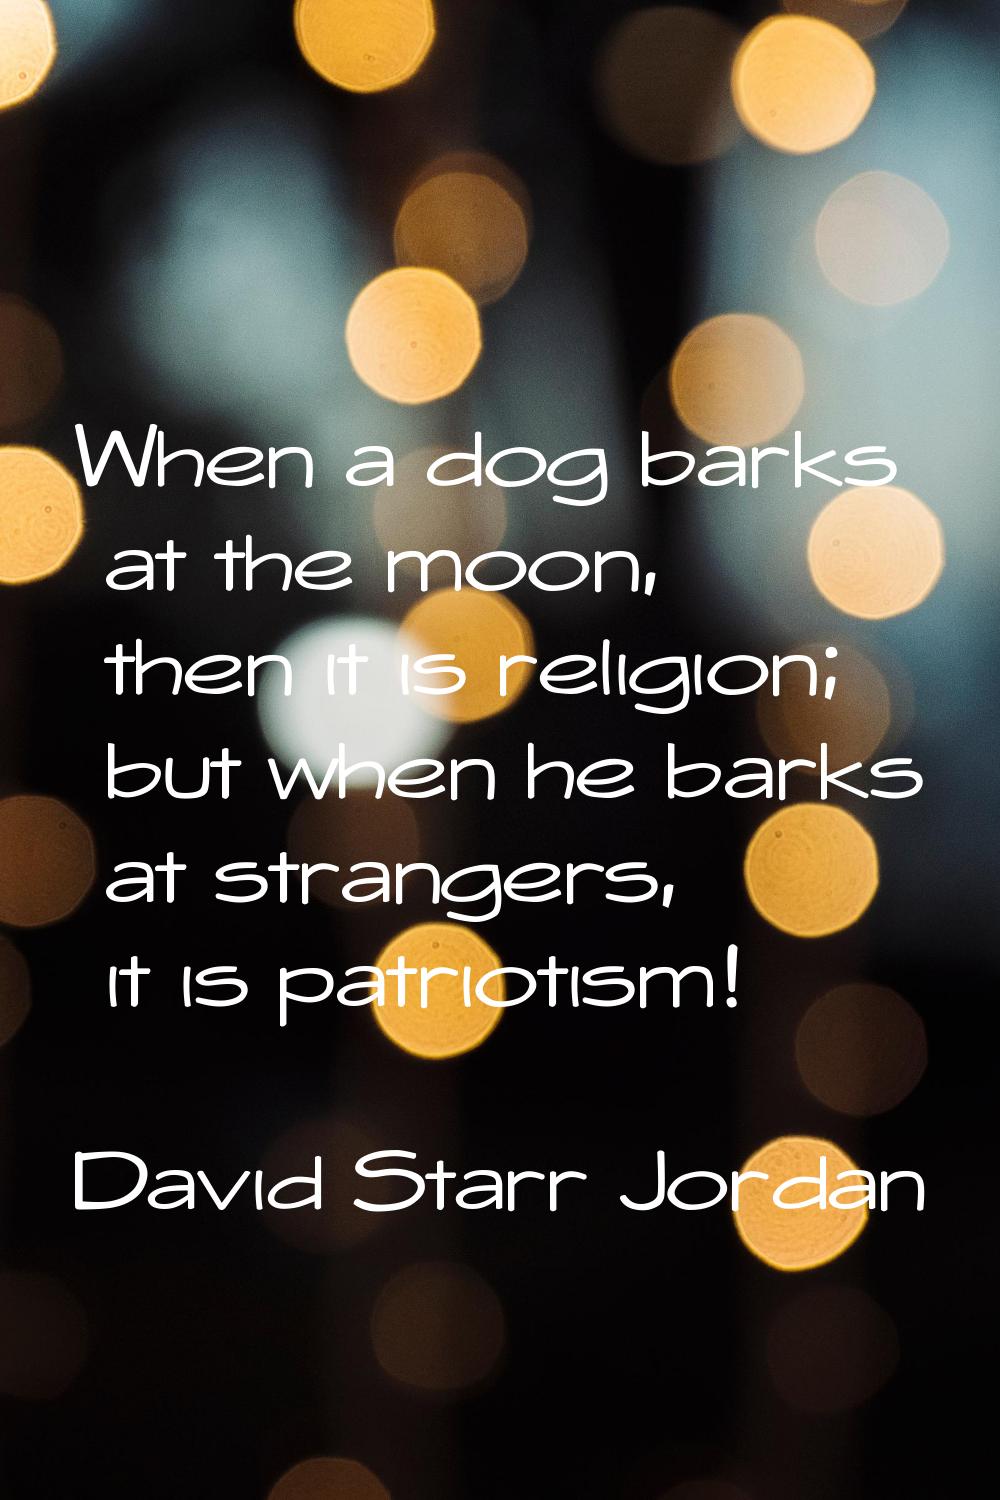 When a dog barks at the moon, then it is religion; but when he barks at strangers, it is patriotism